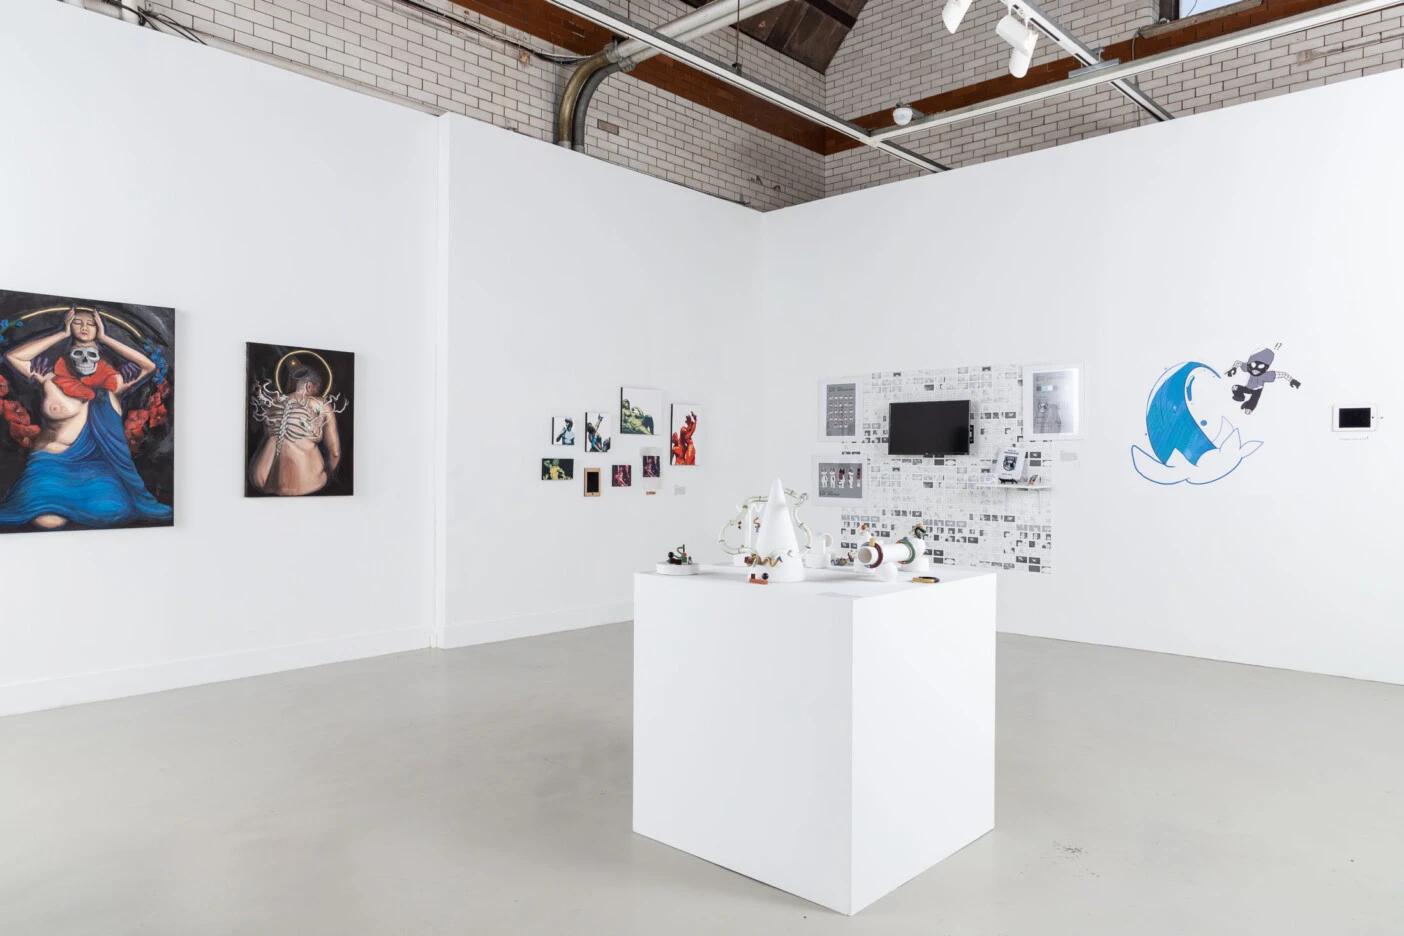 A white room gallery showing different artworks and a block exhibition in the center